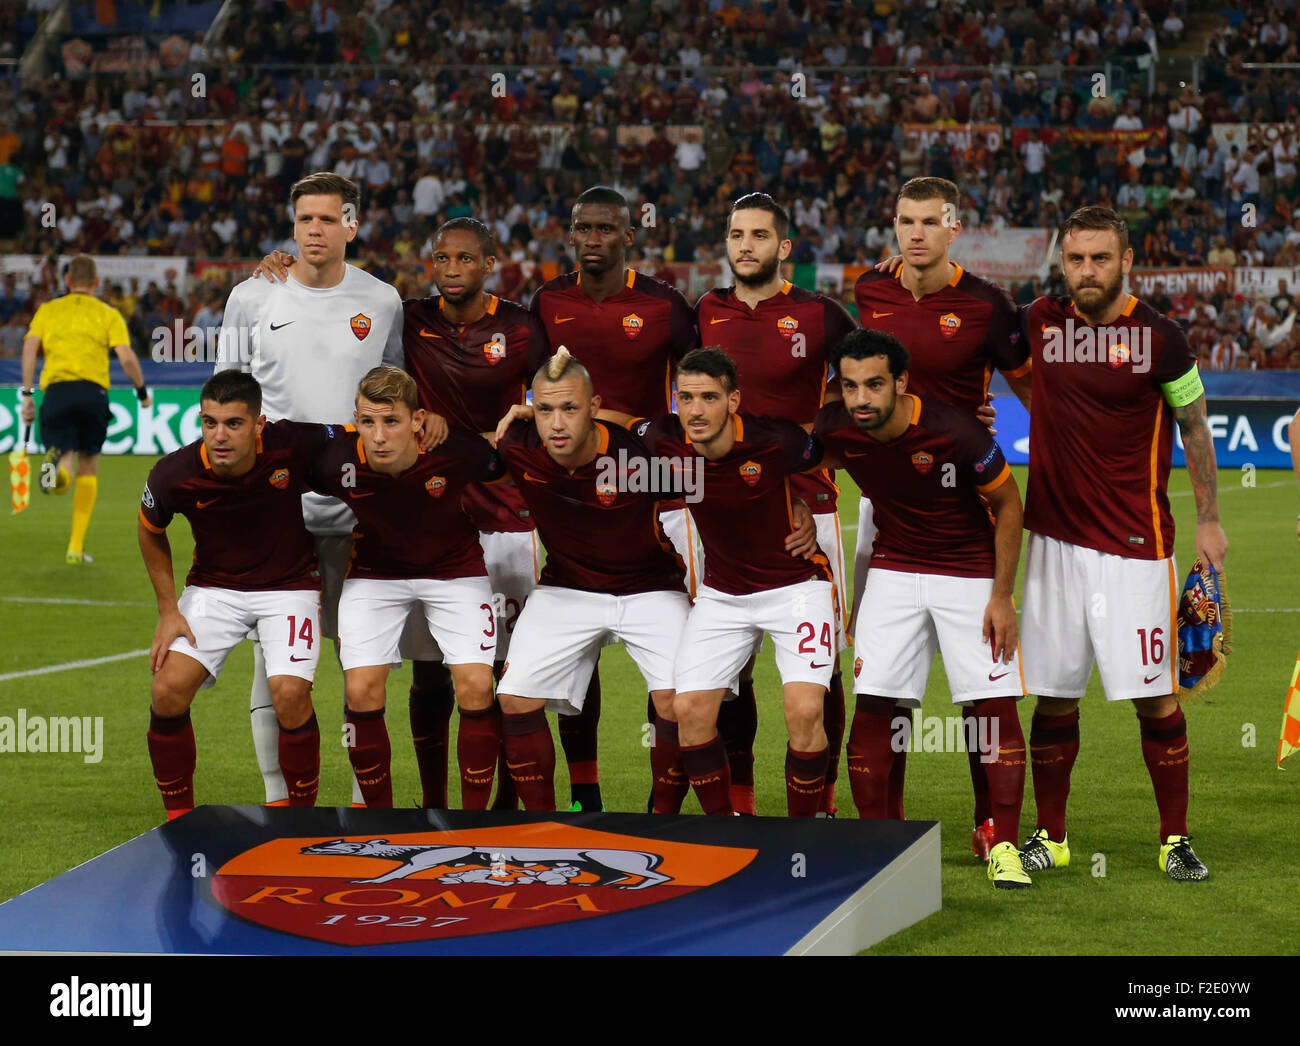 Rome, Italy. 16th Sep, 2015. ASRomabefore  the Champions League Group E soccer match against Barcellona  at the Olympic Stadium in Rome September 16, 2015 Credit:  agnfoto/Alamy Live News Stock Photo